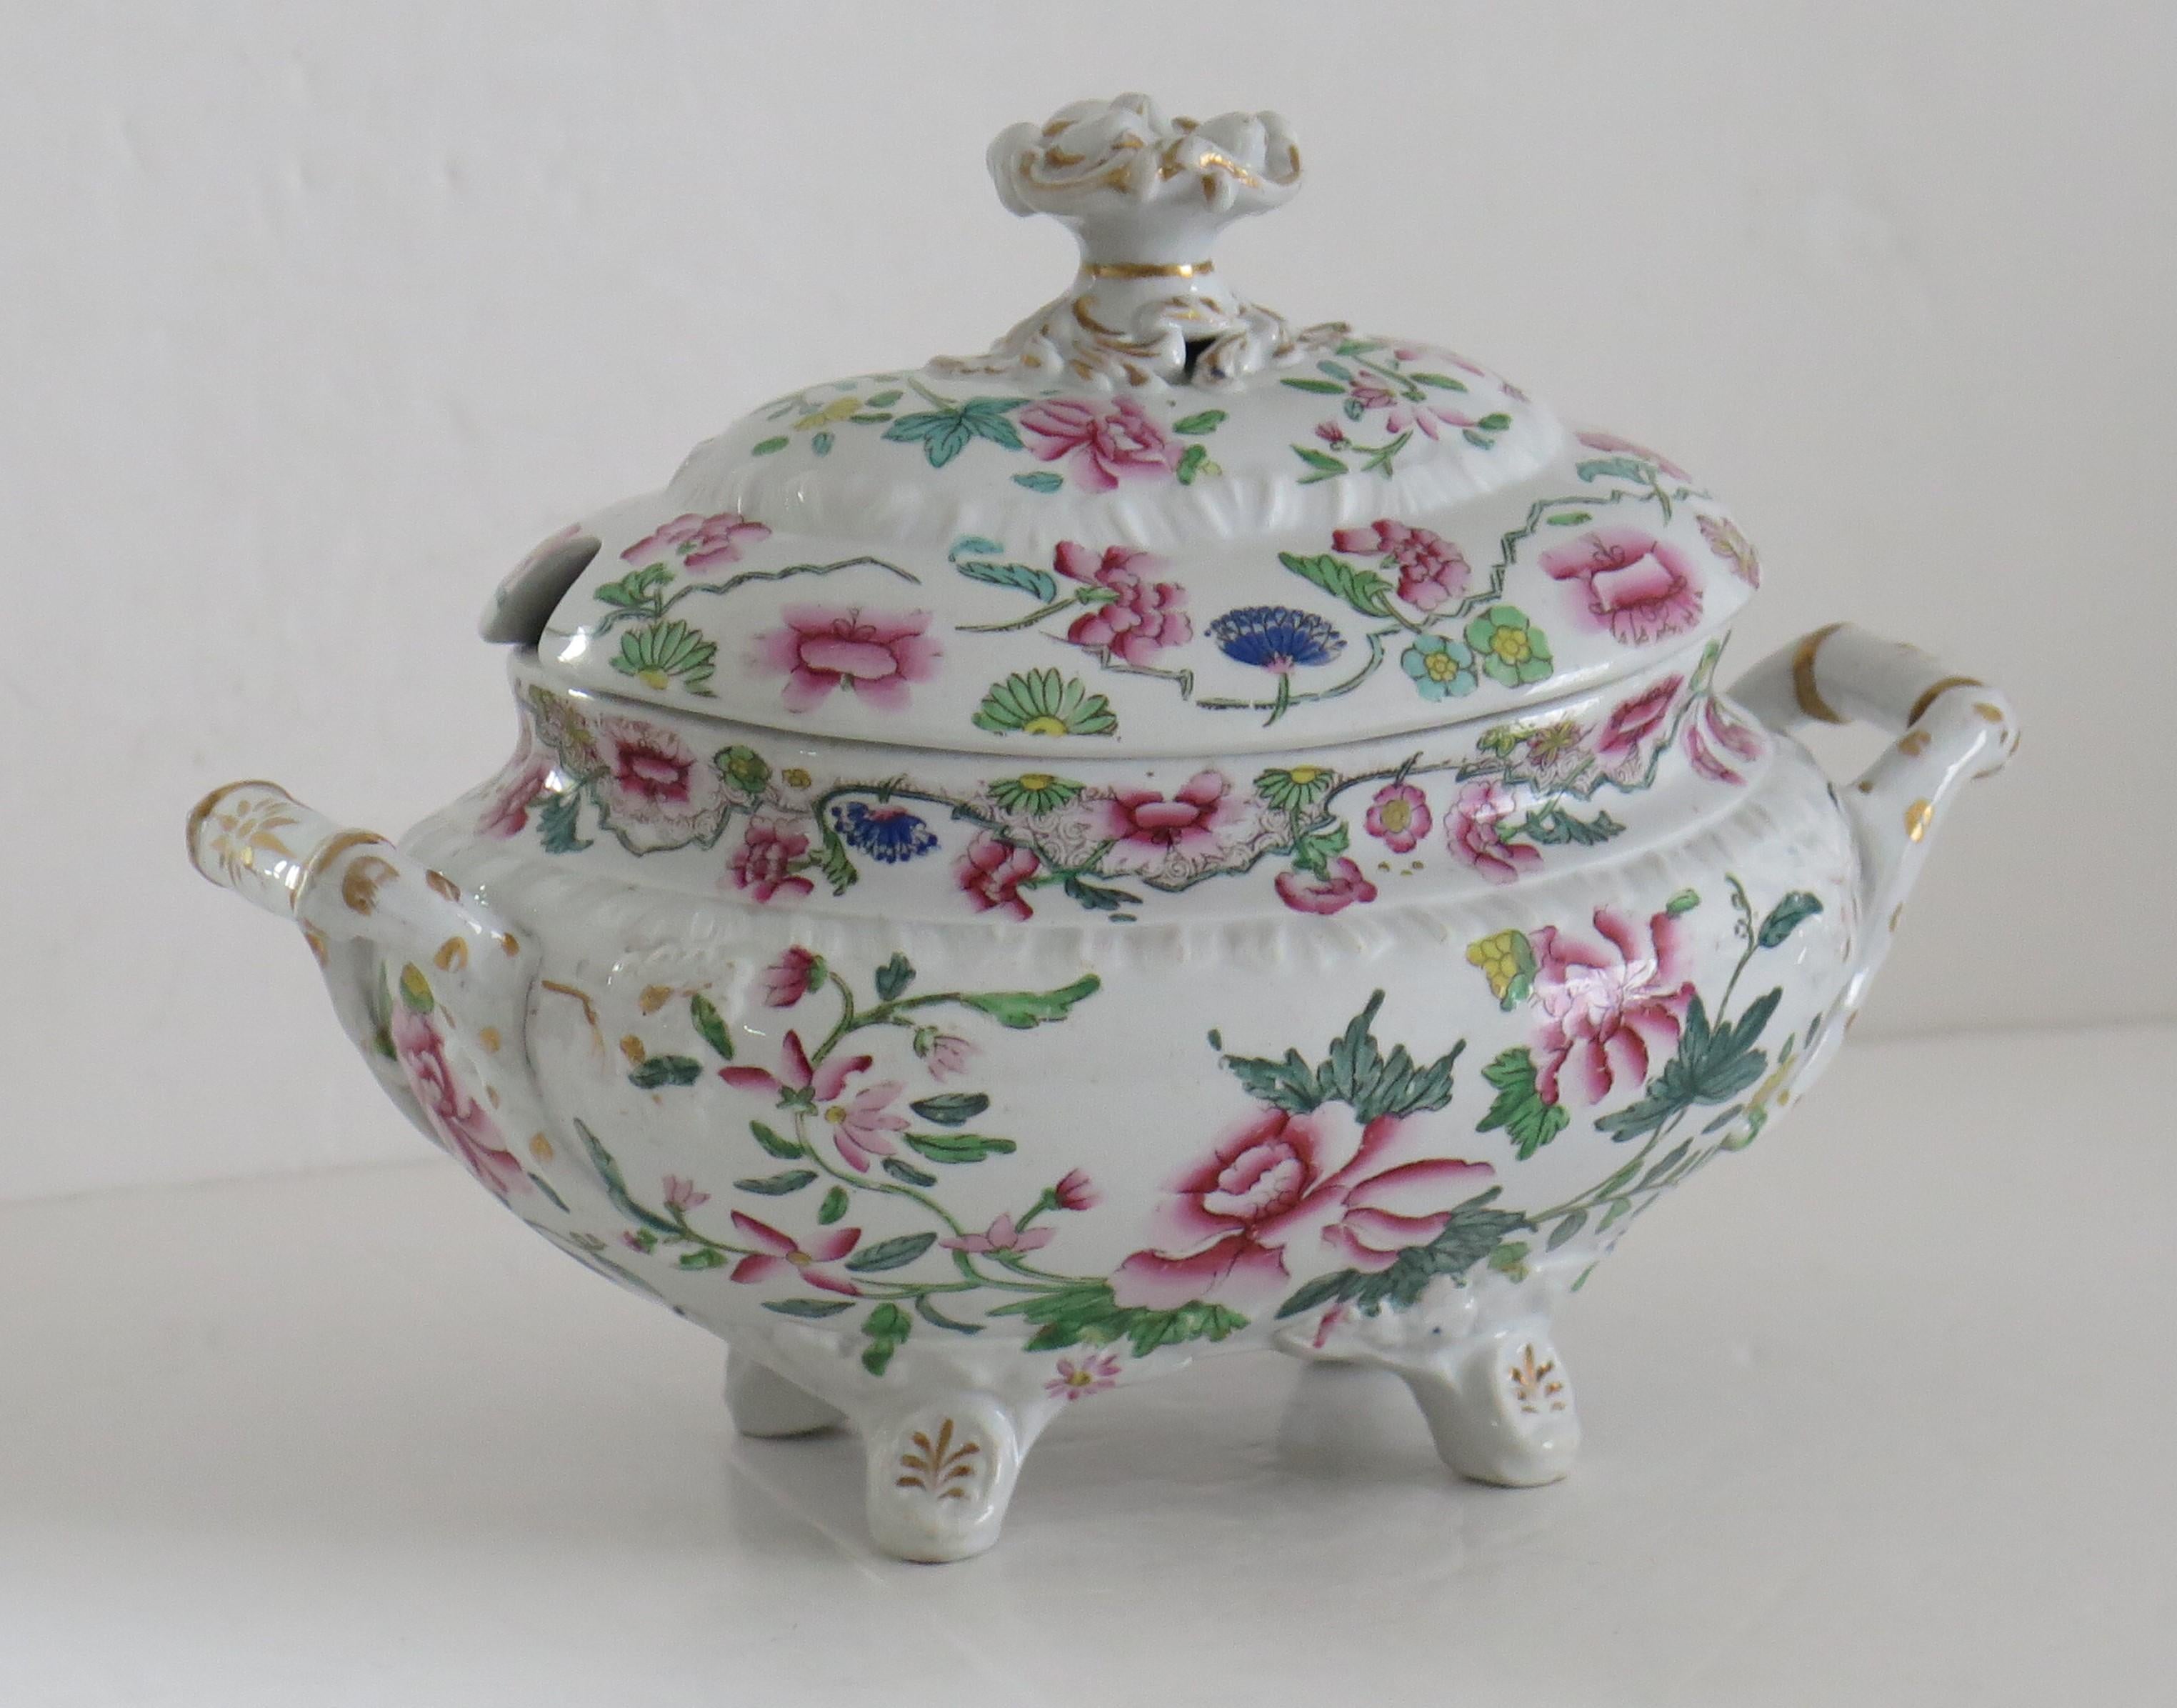 This is a good ironstone Sauce Tureen in hand painted floral pattern No. 8, made by Hicks and Meigh of Shelton, Staffordshire, England between 1812 and 1822, circa 1815.

The piece is well potted with two side handles, sitting on four small feet